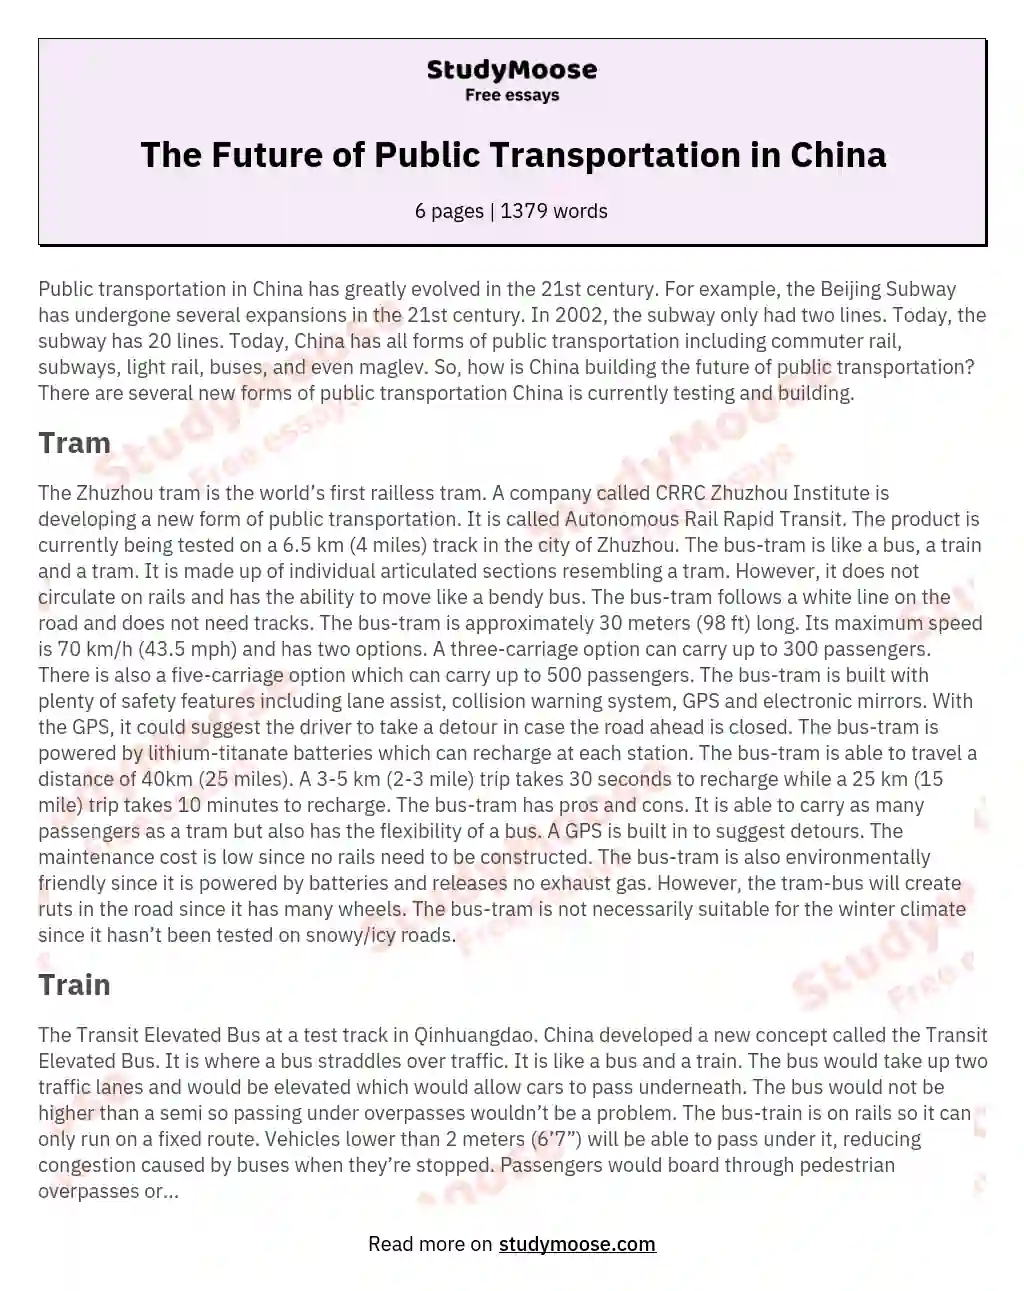 The Future of Public Transportation in China essay